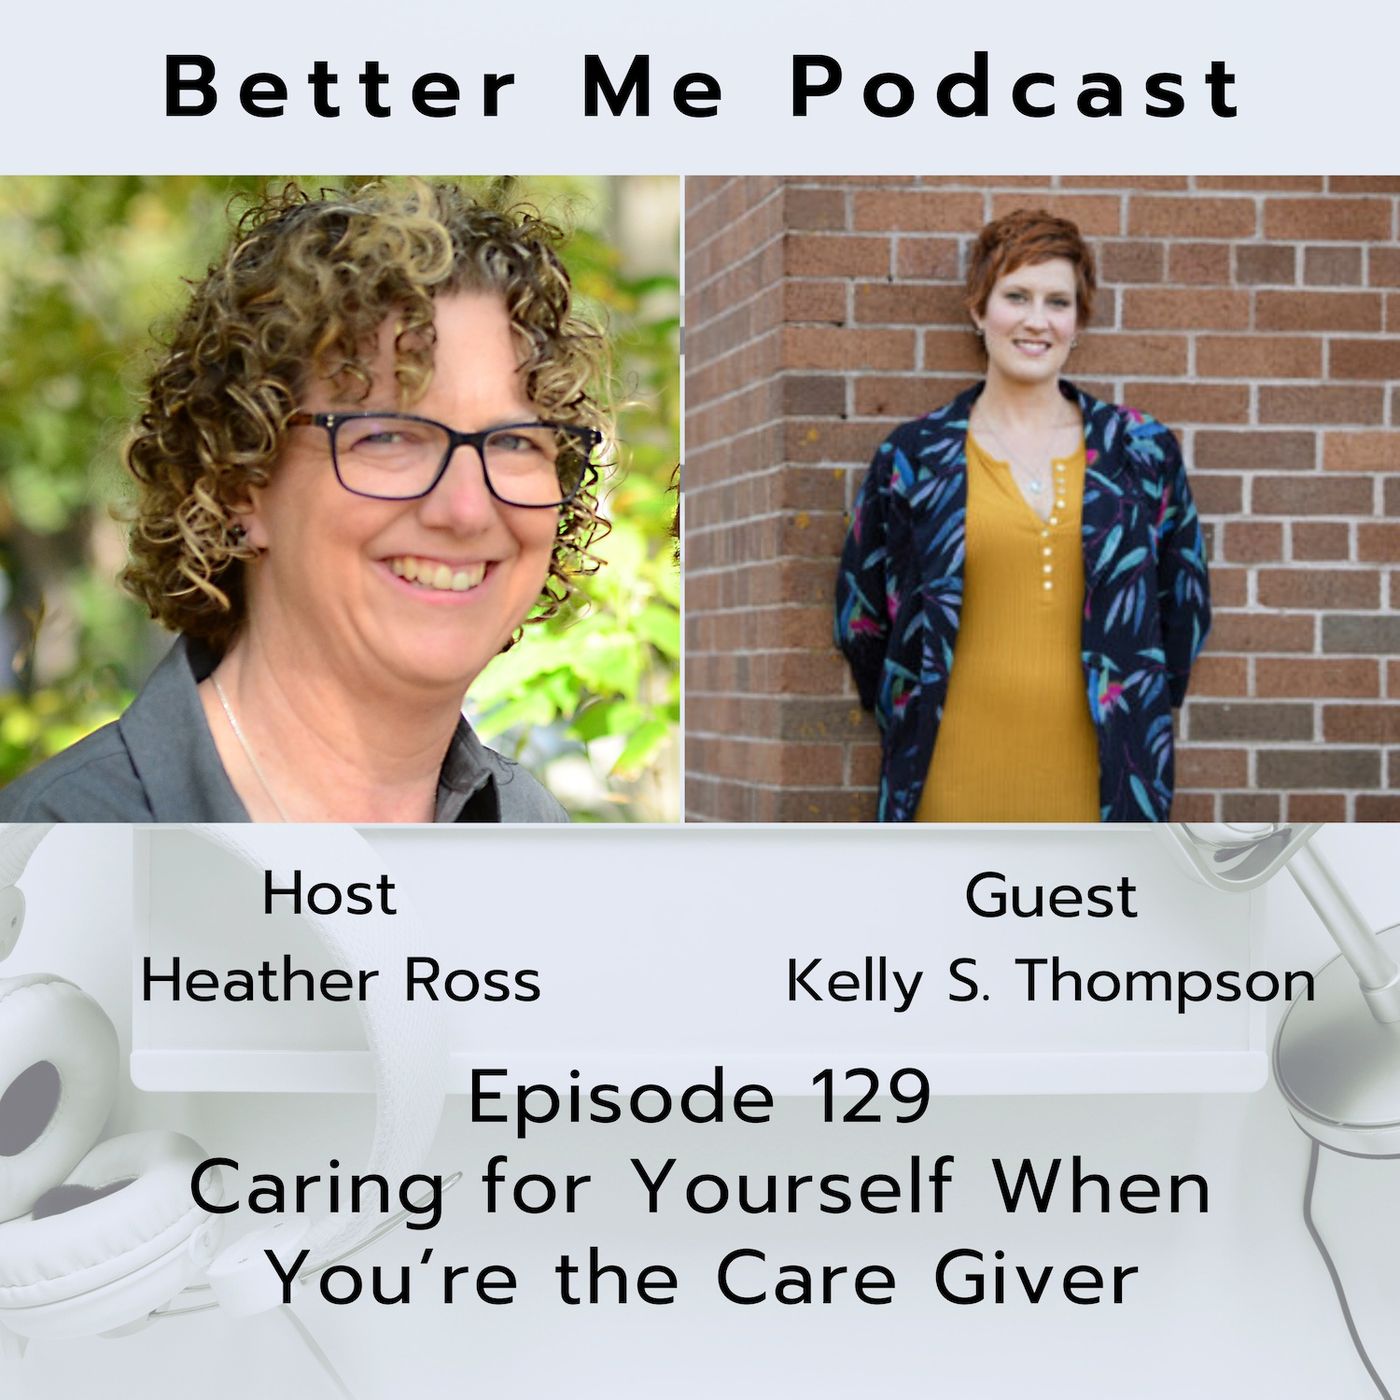 EP 129 Caring For Yourself When You’re the Caregiver (with guest Kelly S. Thompson)